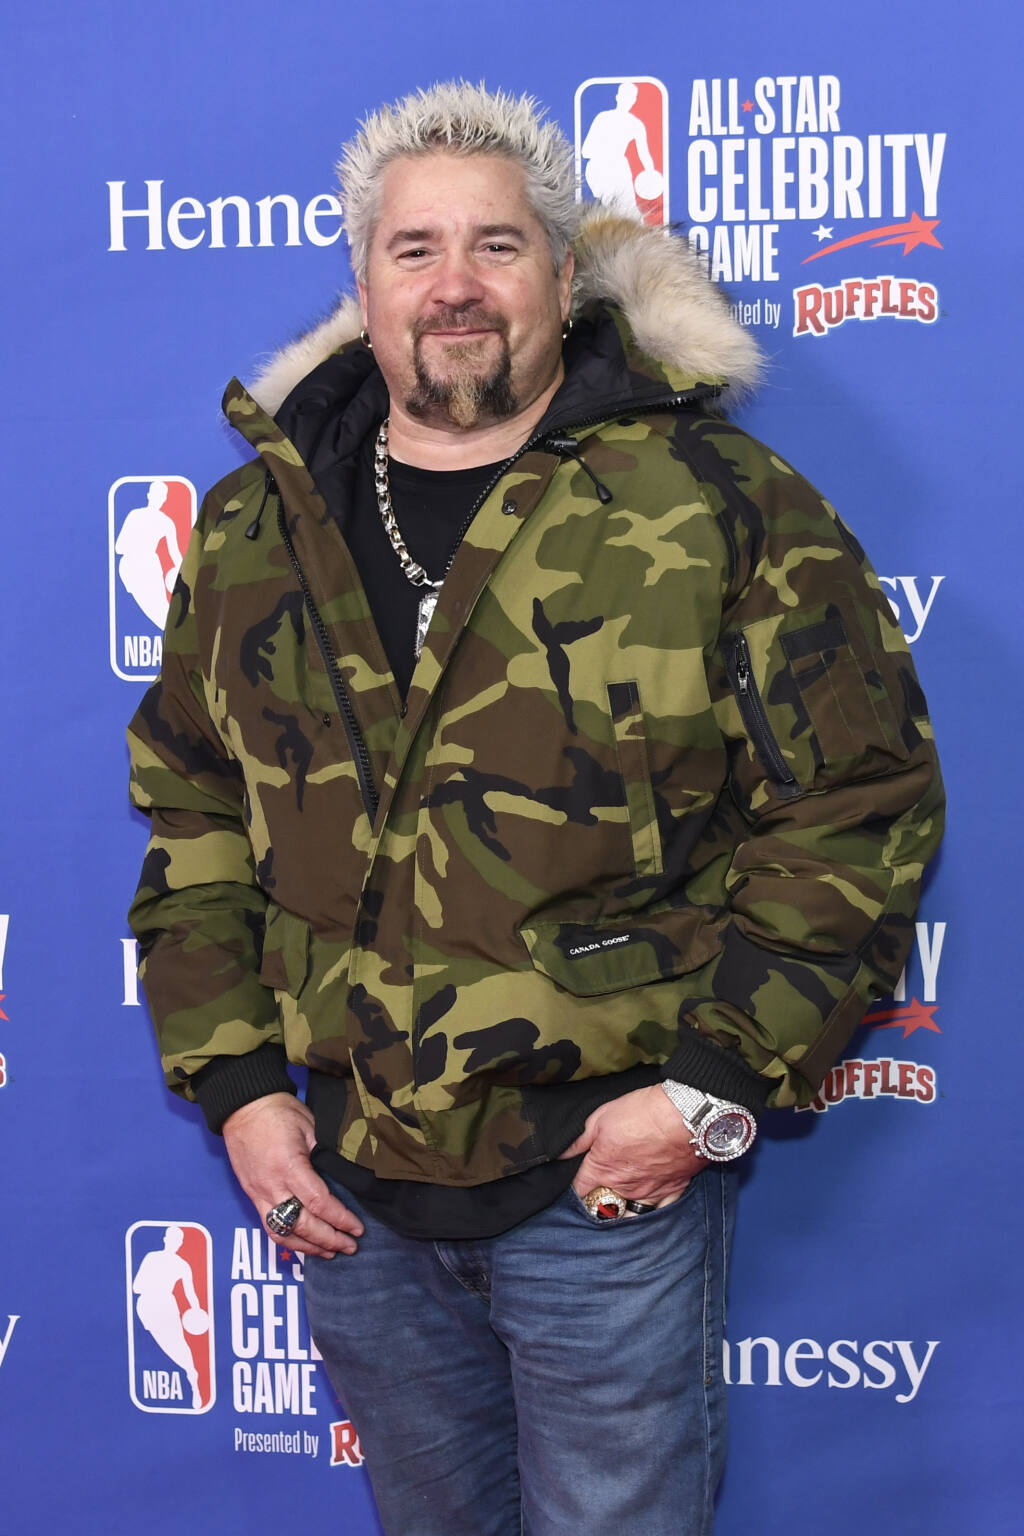 Guy Fieri arrives on the red carpet prior to an NBA Celebrity All-Star basketball game Friday, Feb. 14, 2020, in Chicago. (AP Photo/David Banks)